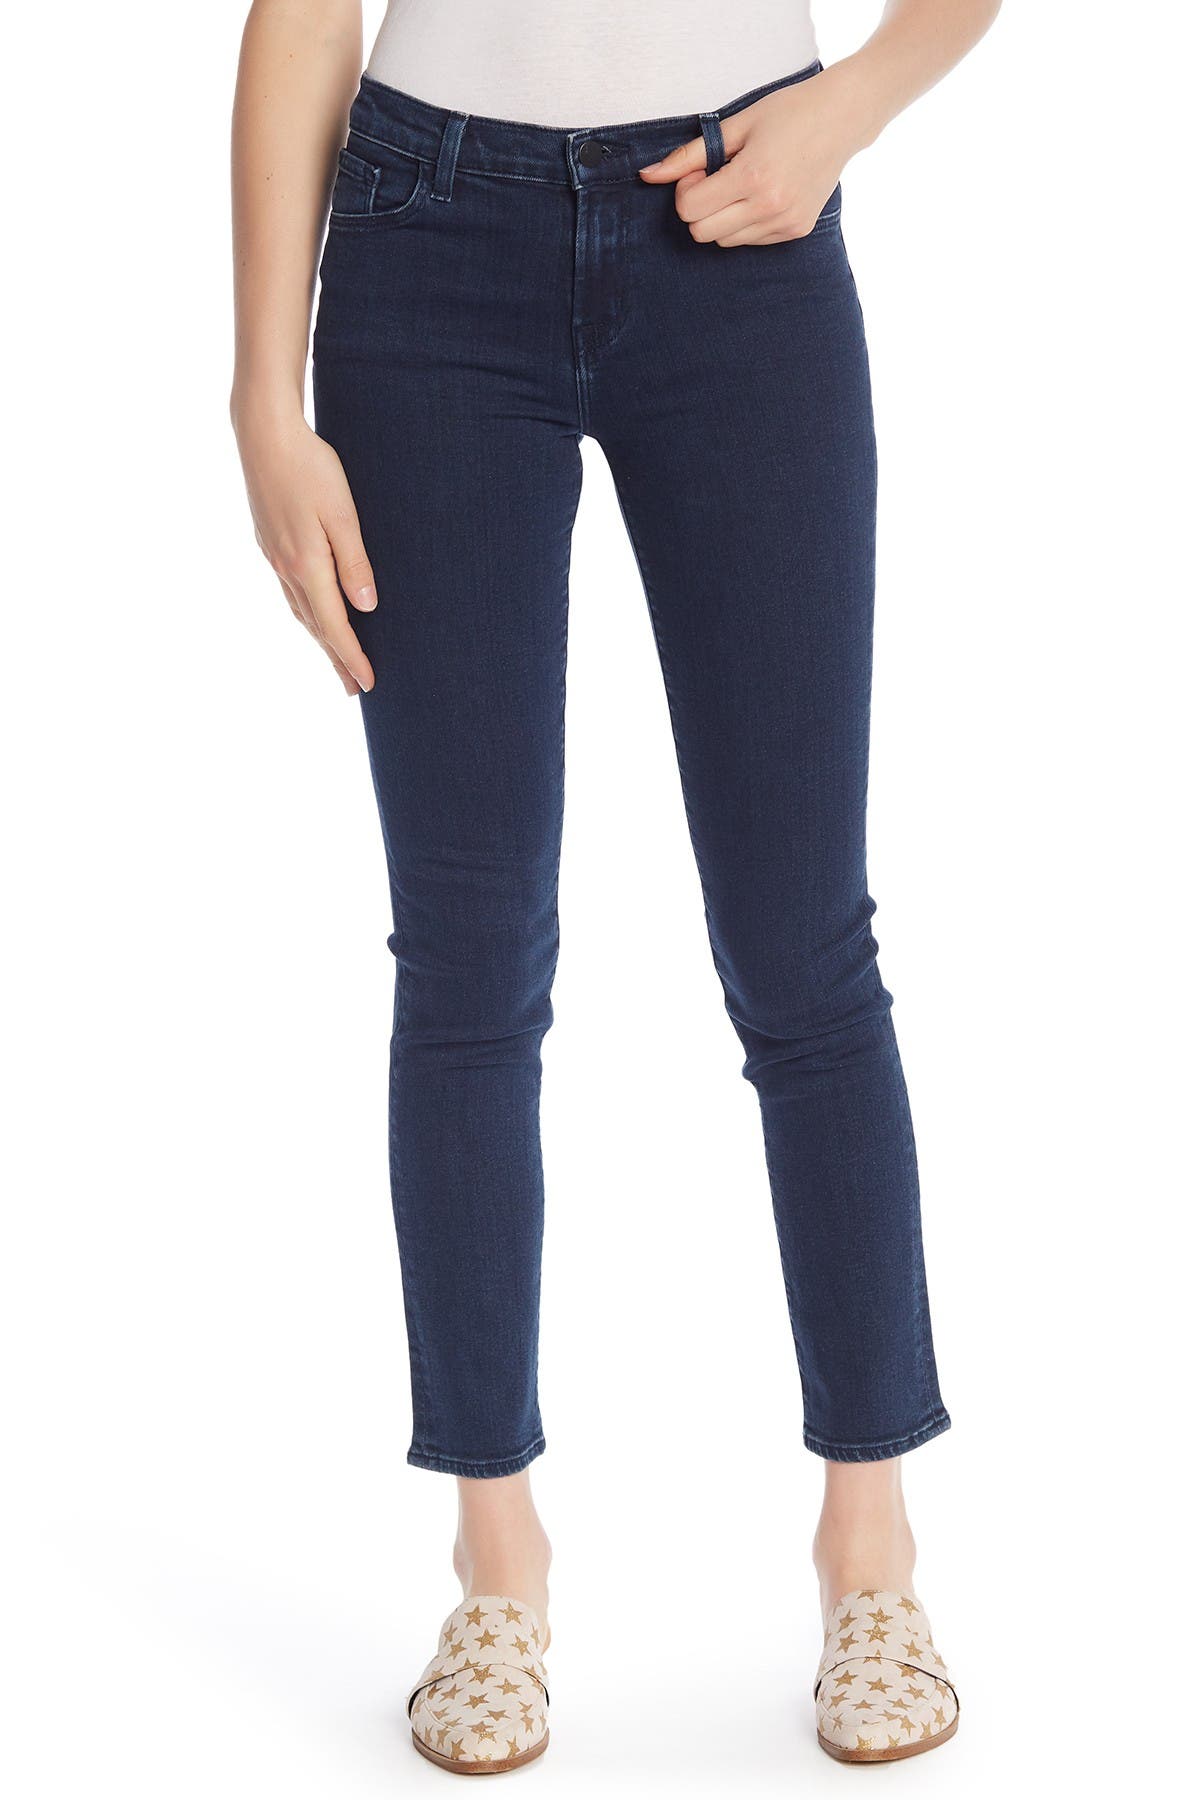 levi's low rise skinny jeans womens